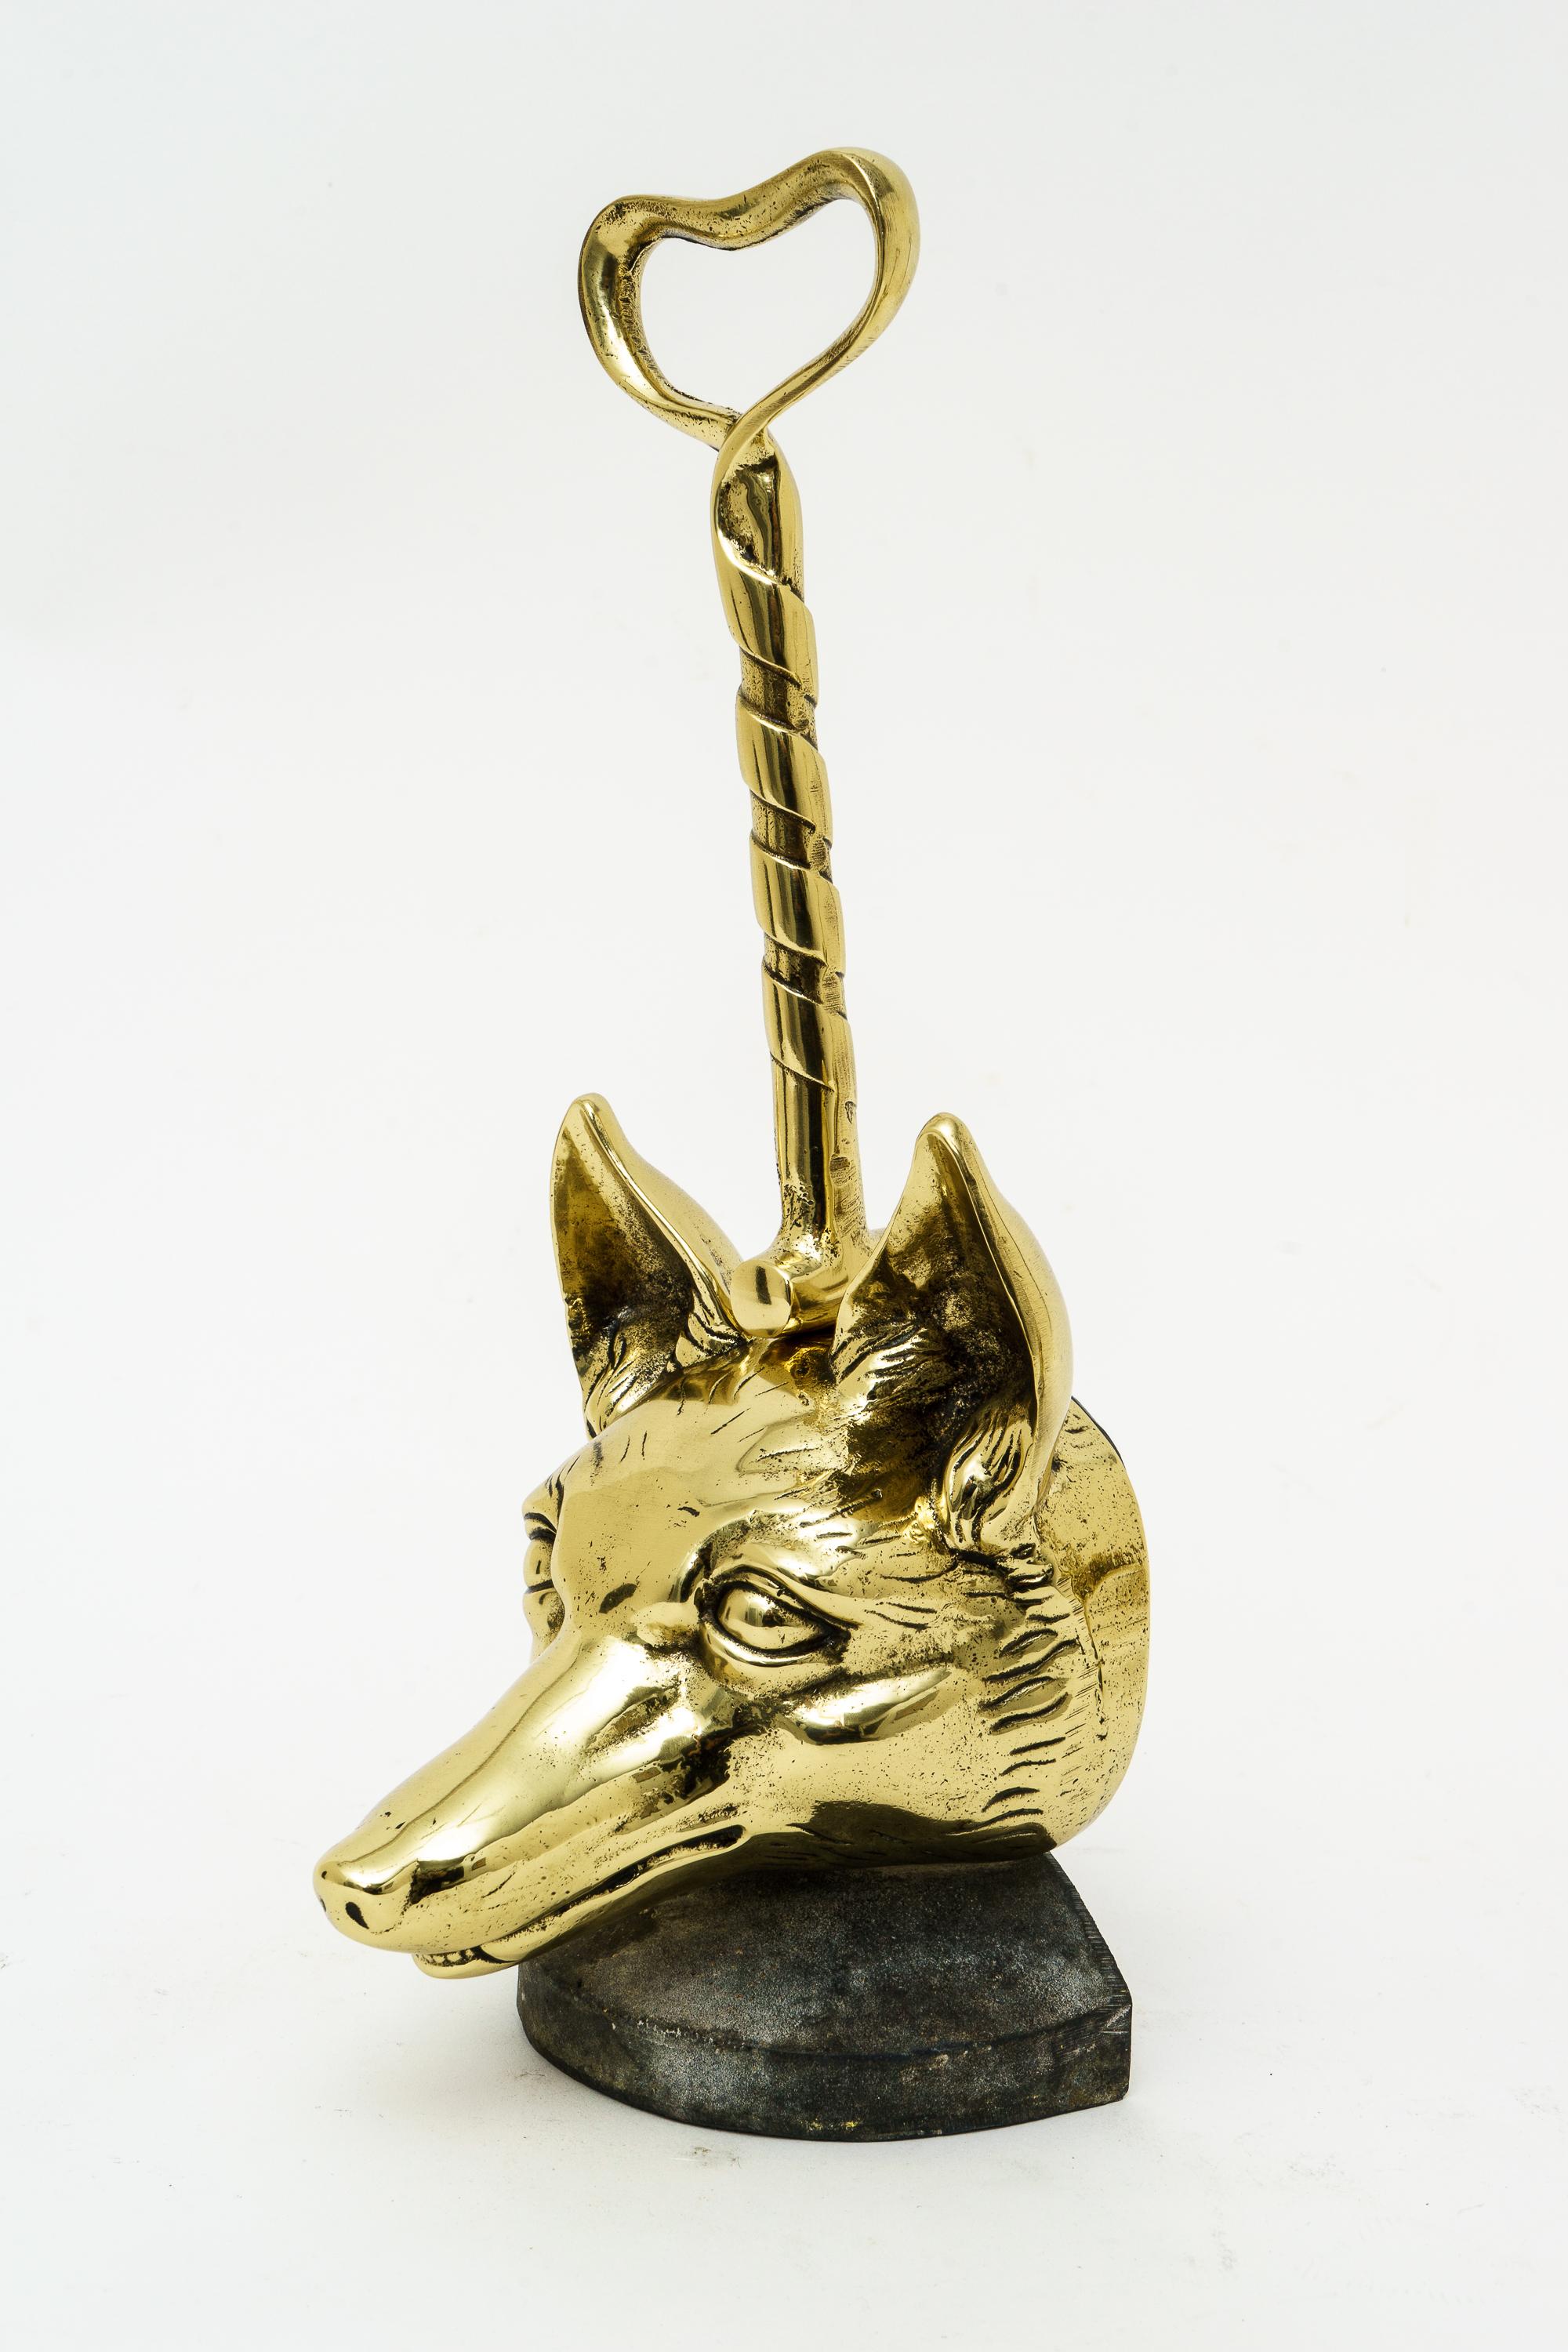 Delightful 1920s English door stop. Polished brass fox head with riding crop, professionally polished and lacquered. Measures: 13